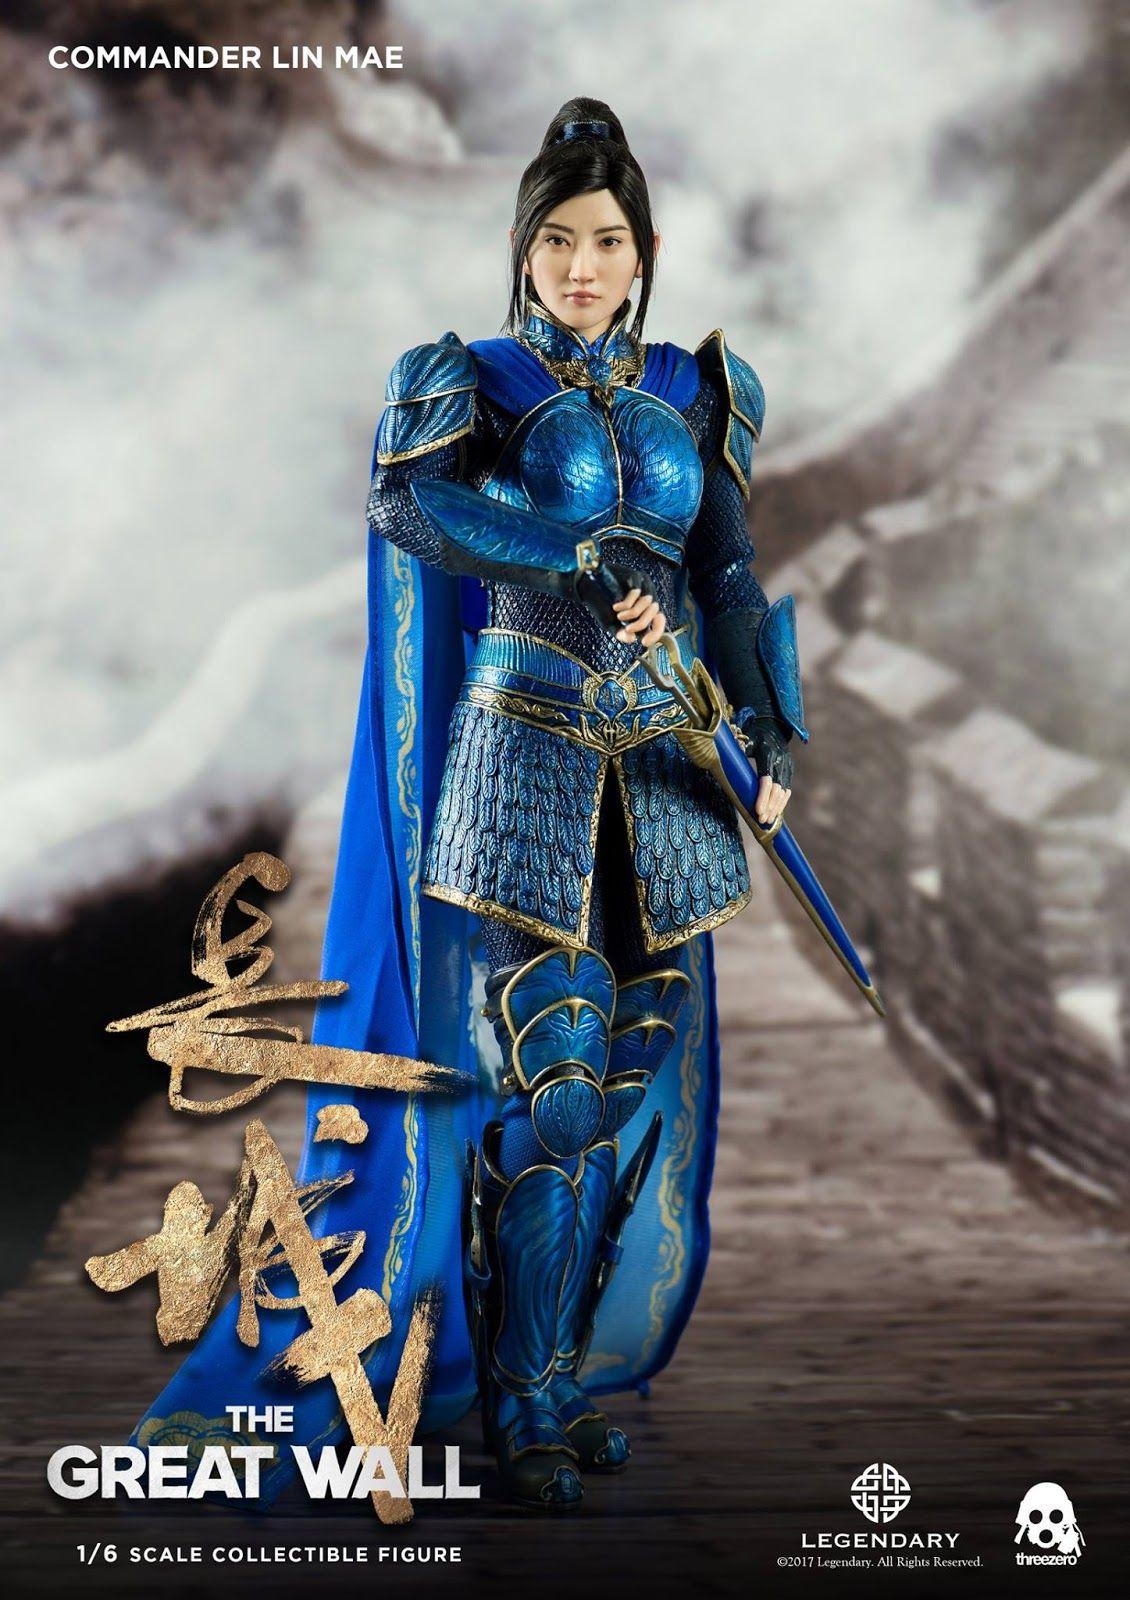 Commander Lin Mae From The Movie The Great Wall. Sideshow Hot Toys